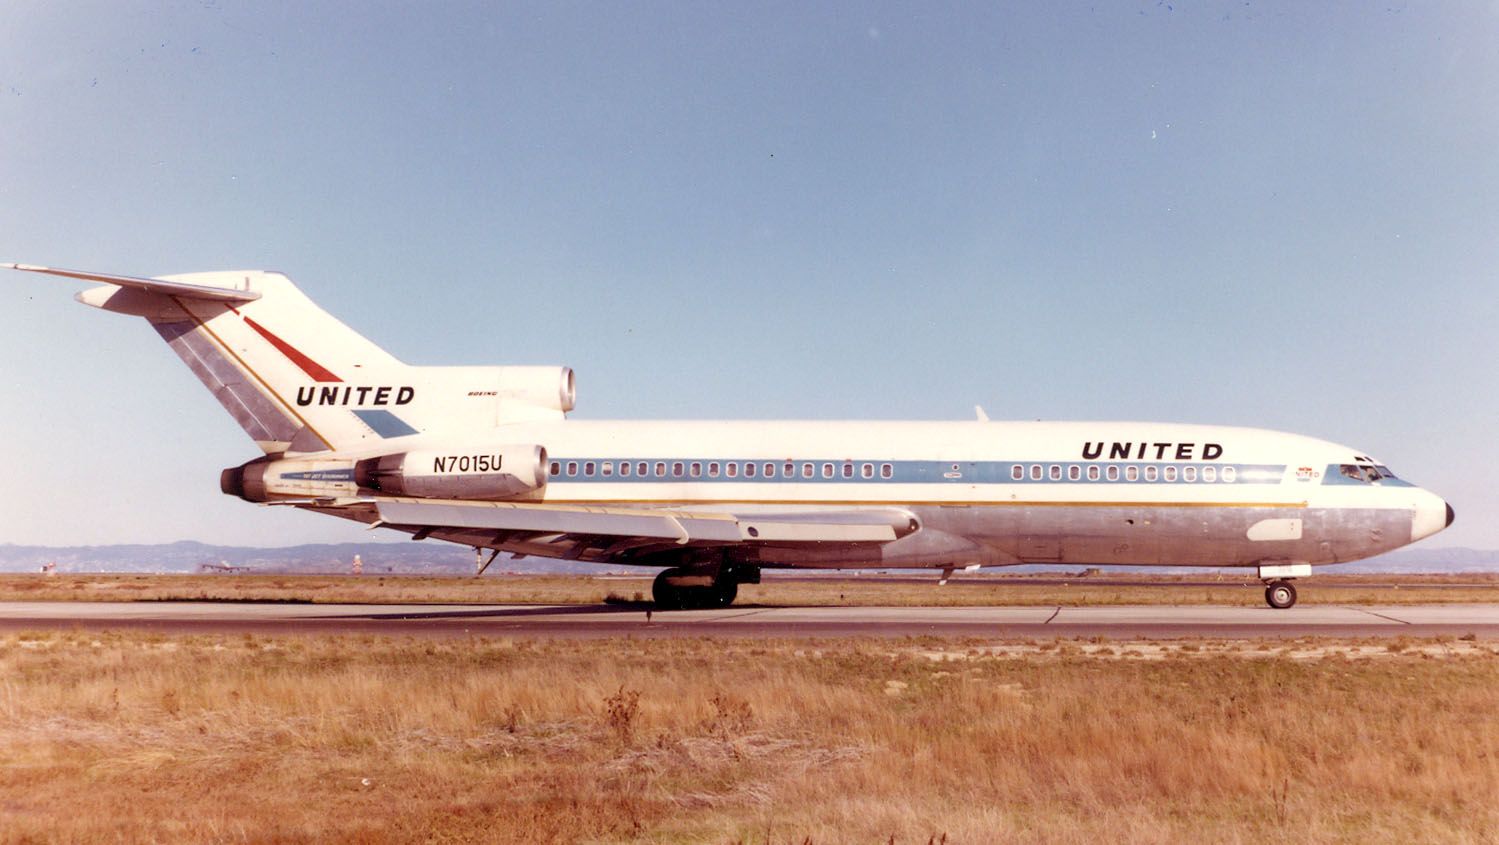 A United Airlines Boeing 727 on a taxiway.